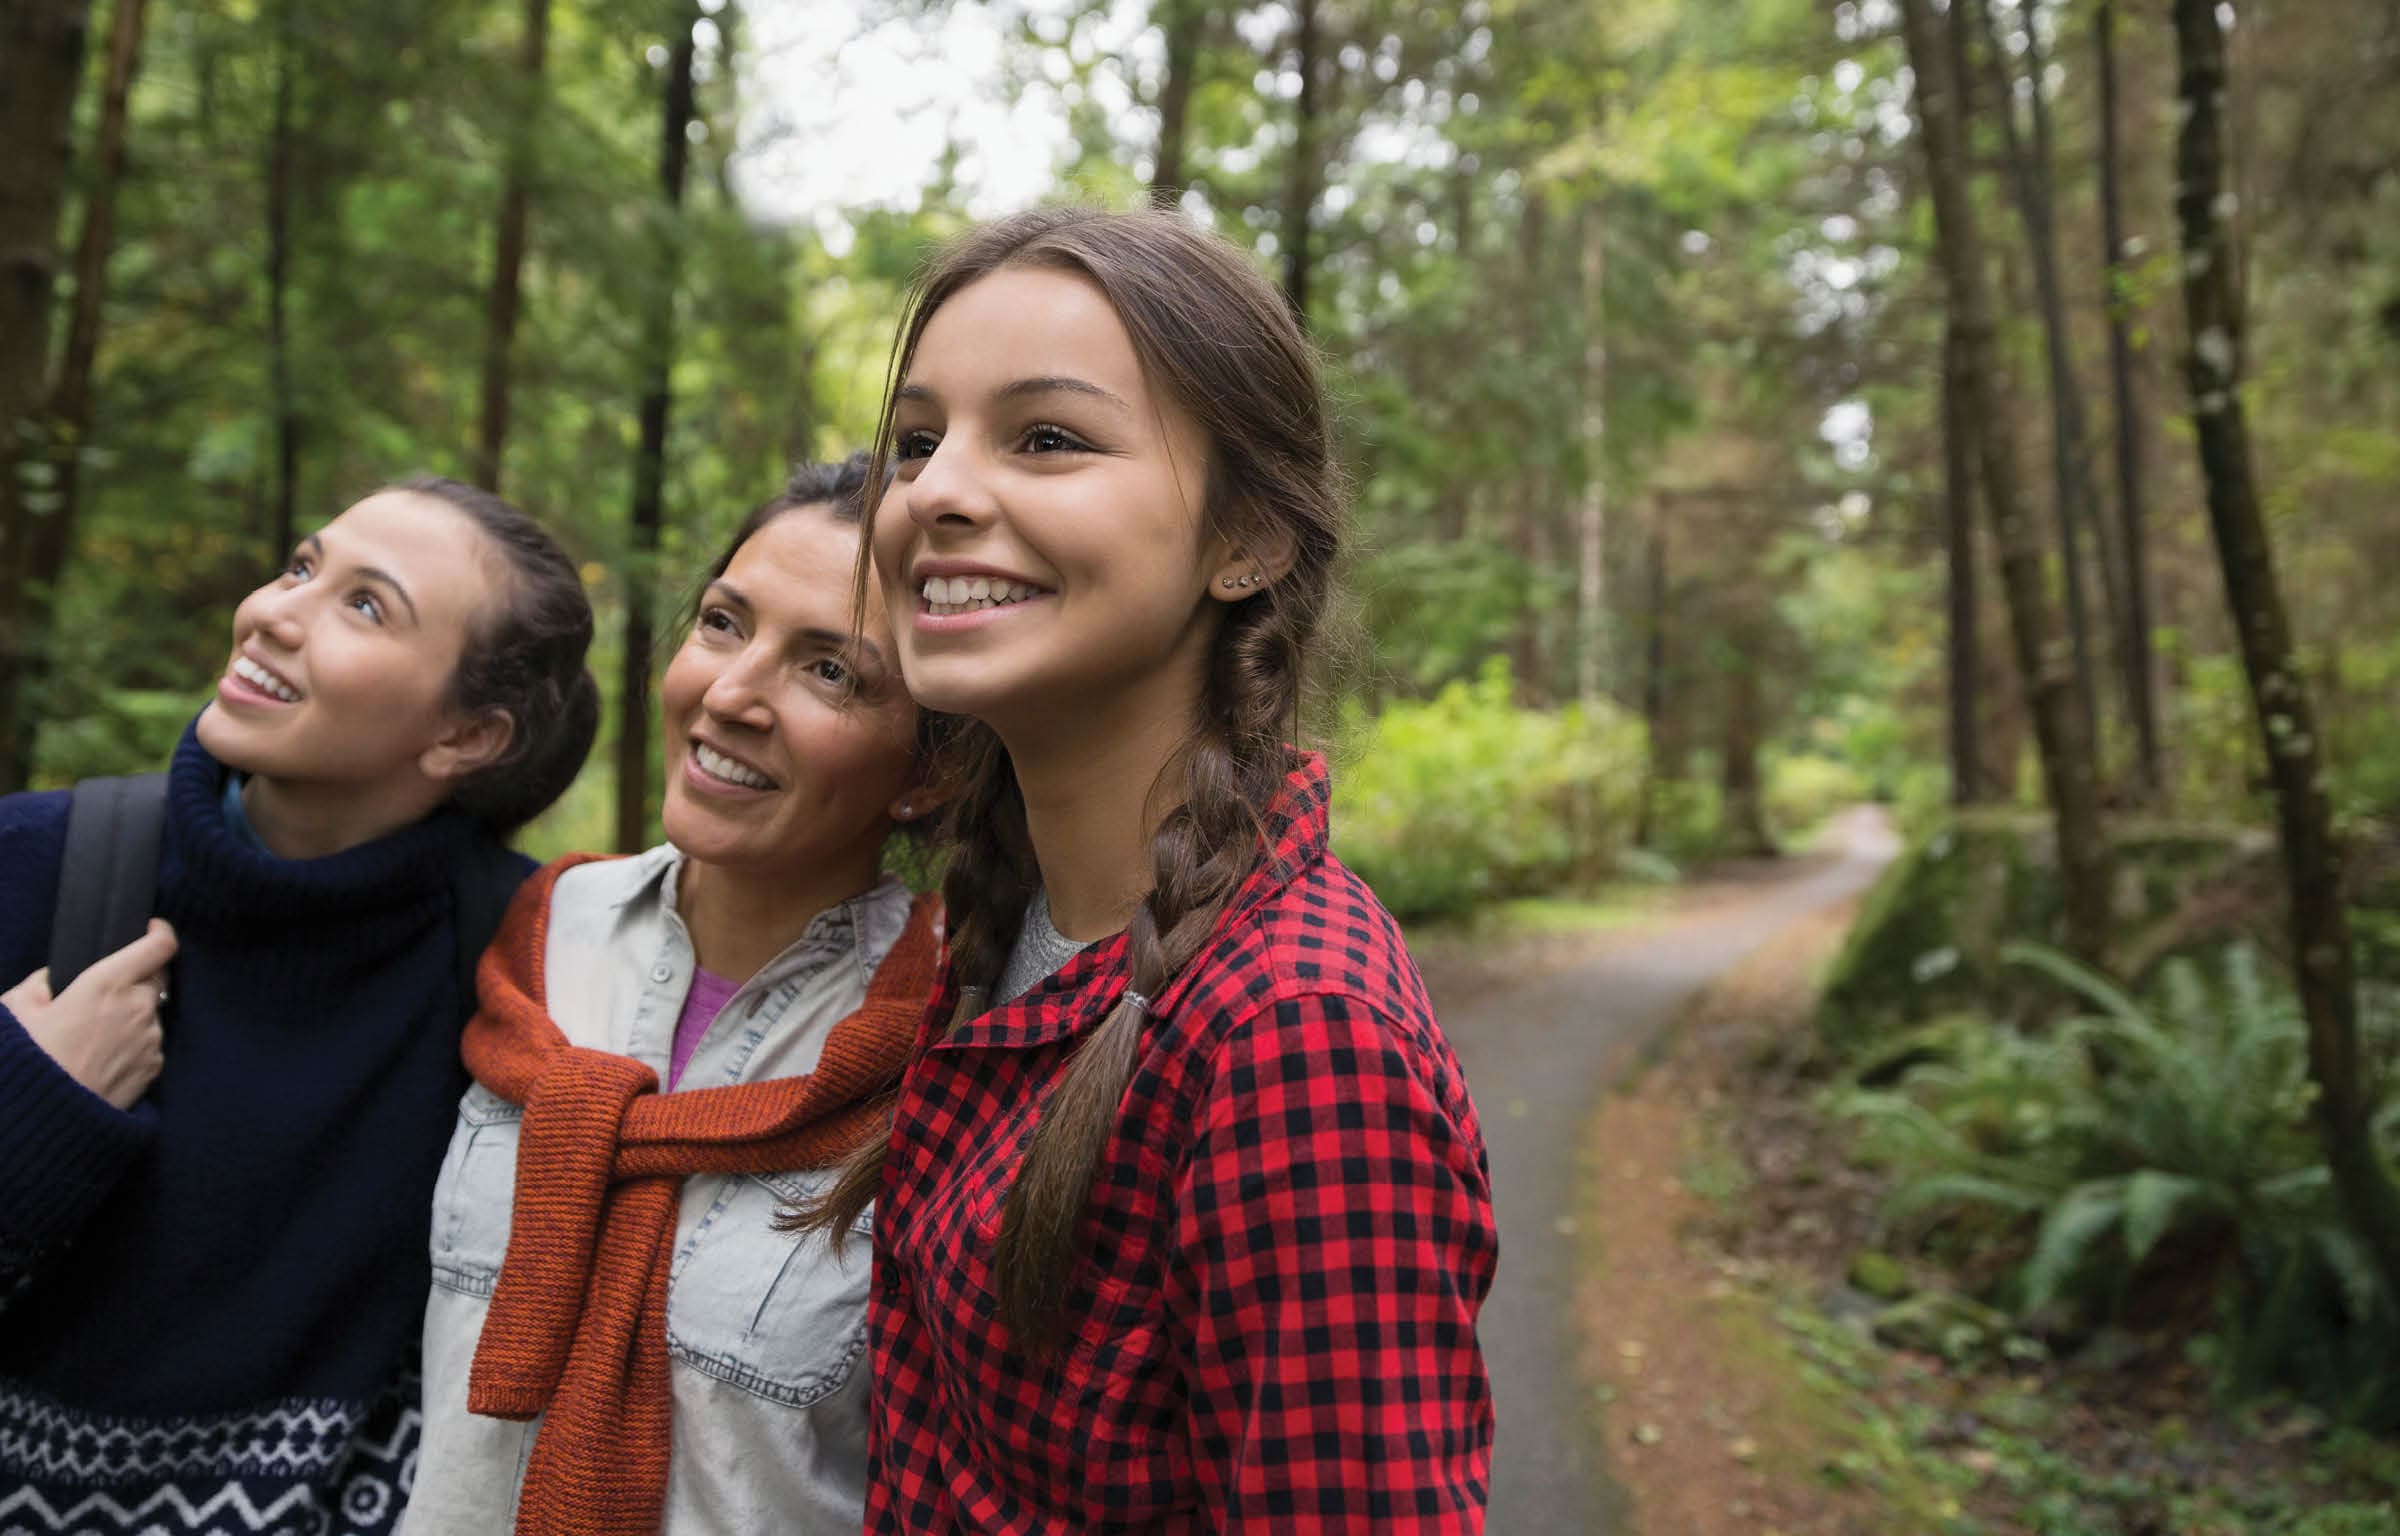 A mother and her two daughters are hiking through the wood. They are looking up in the trees and smiling.